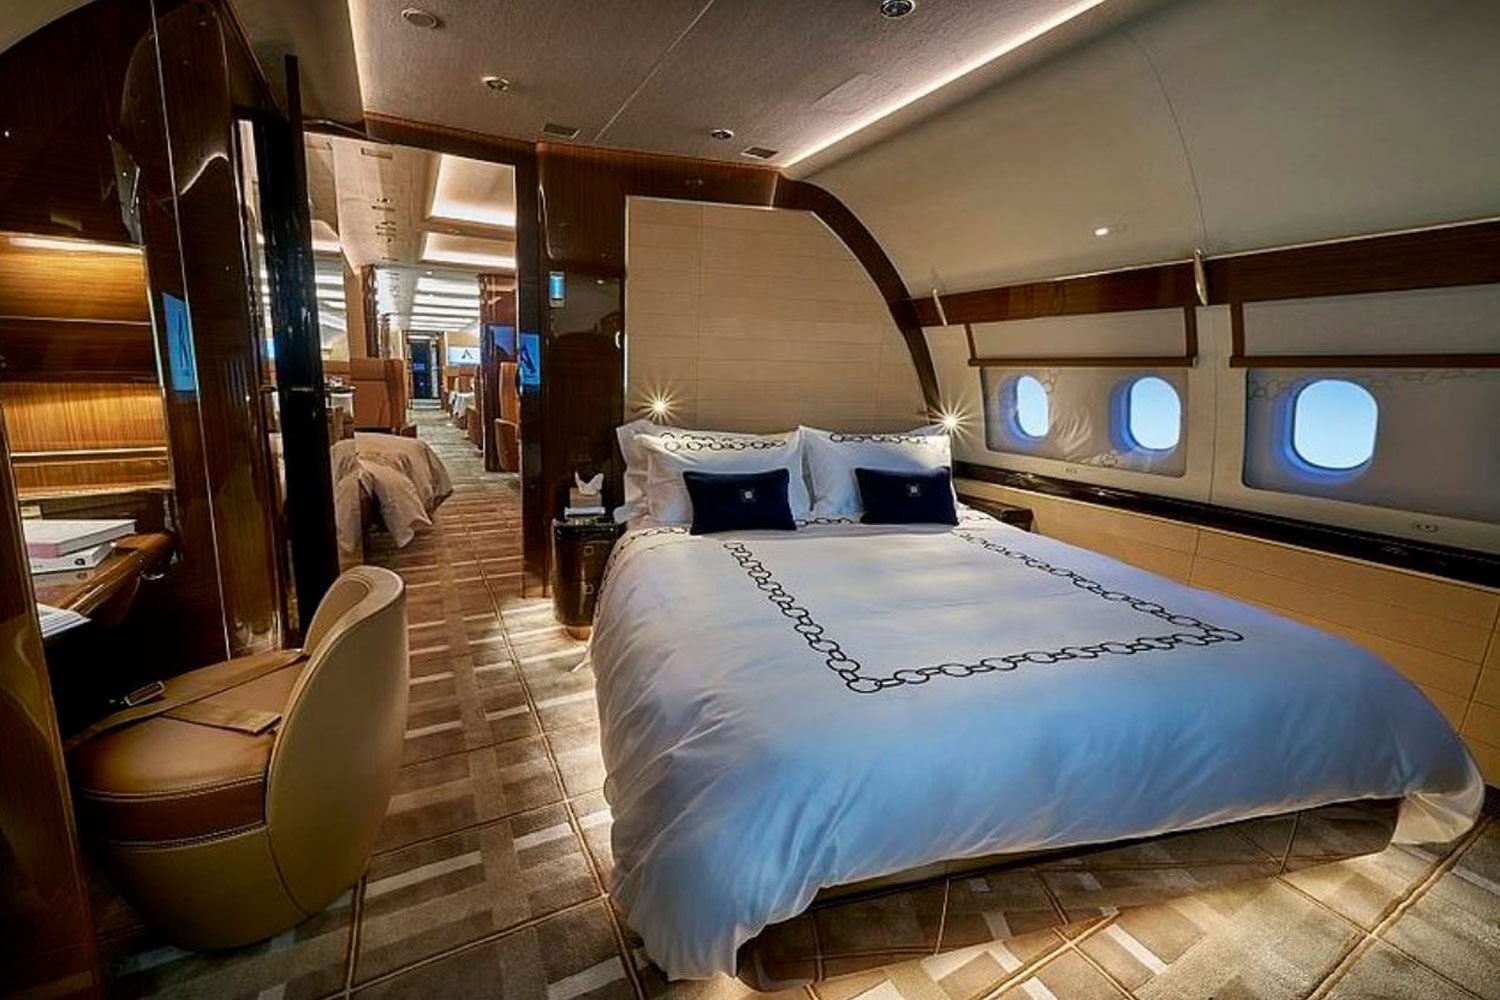 Take A Peak Inside Airbus’ Most Luxurious Private Jet